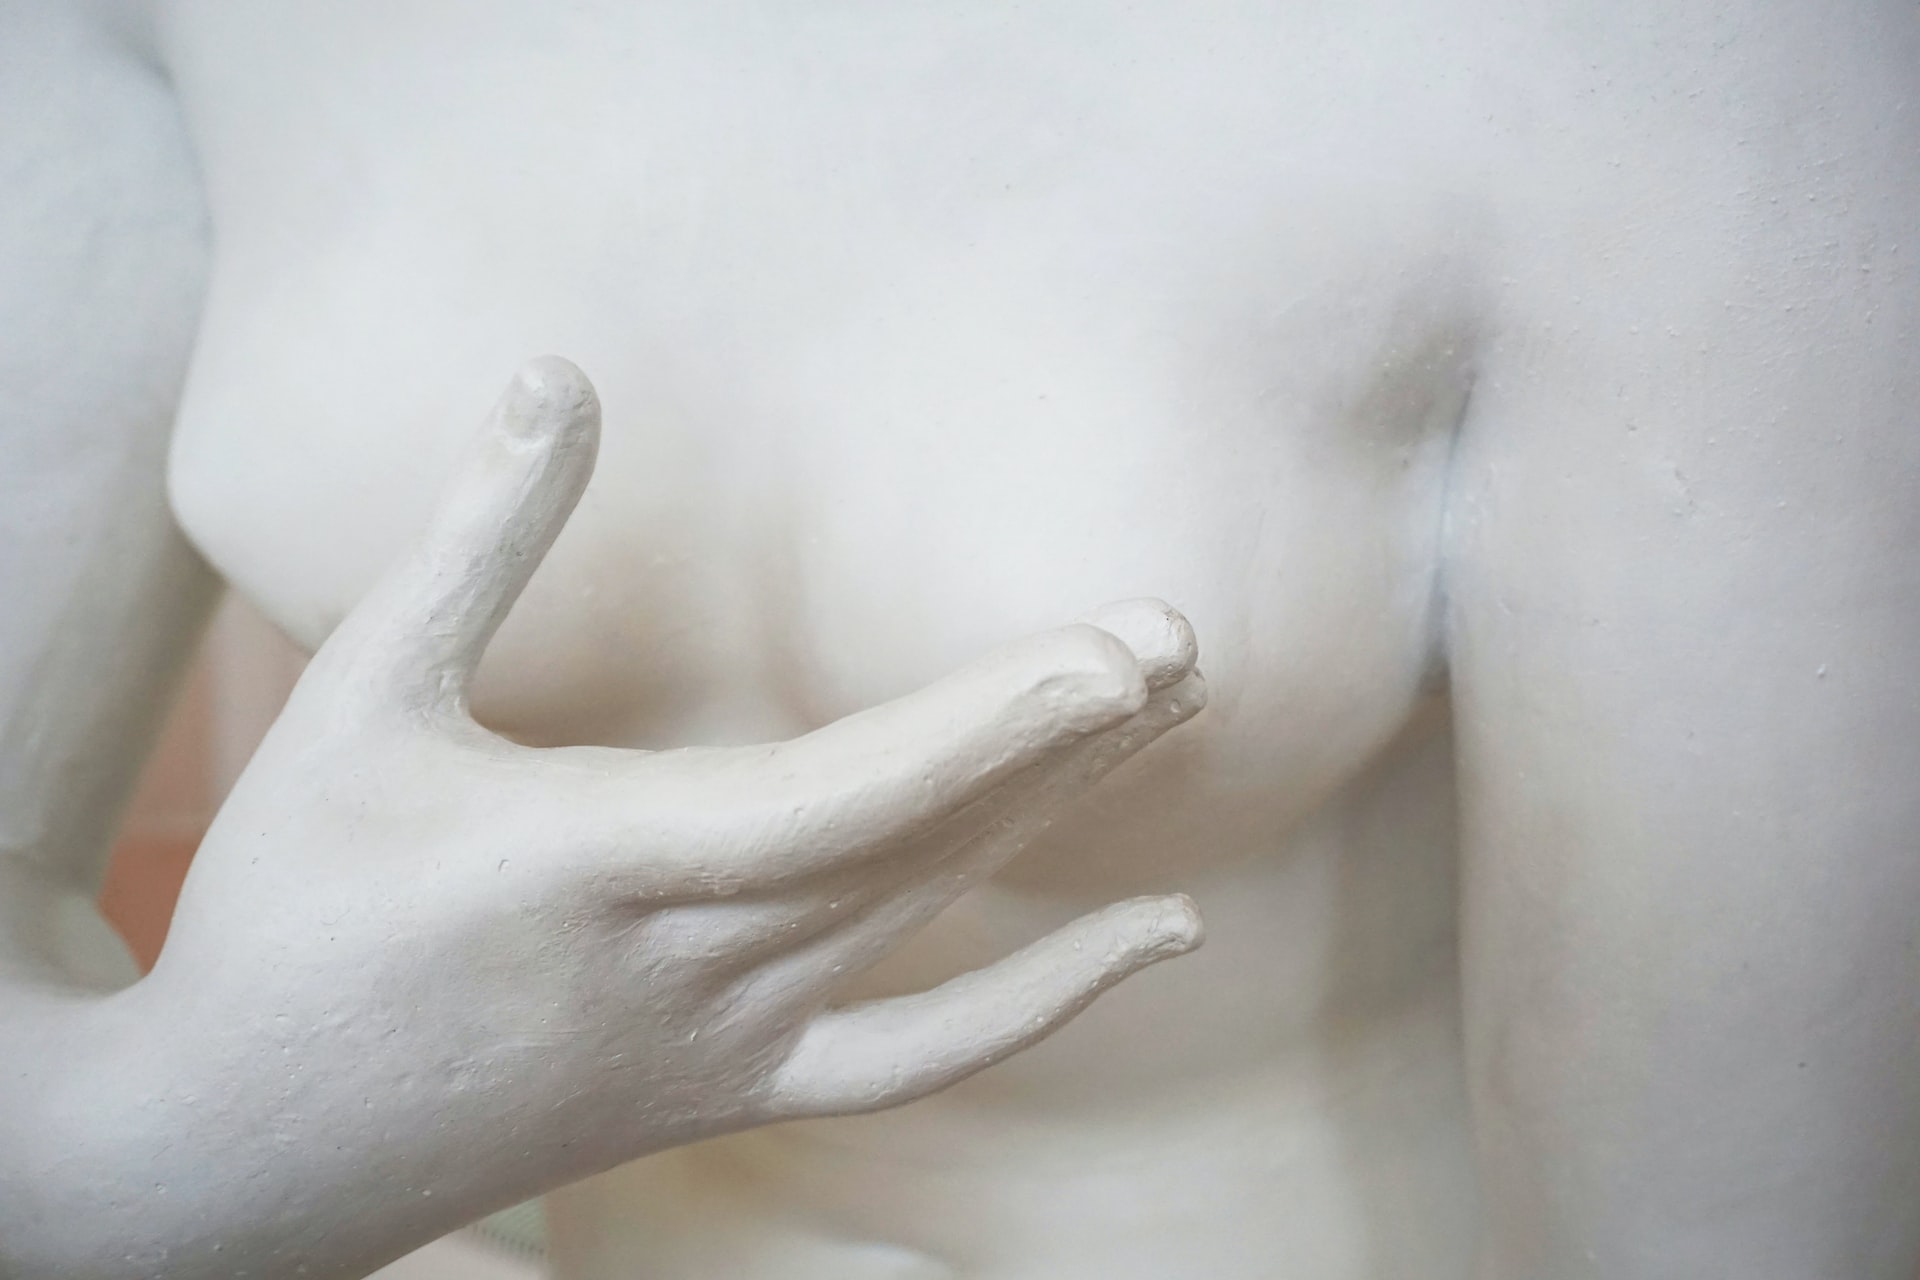 Sculpture of a woman's body